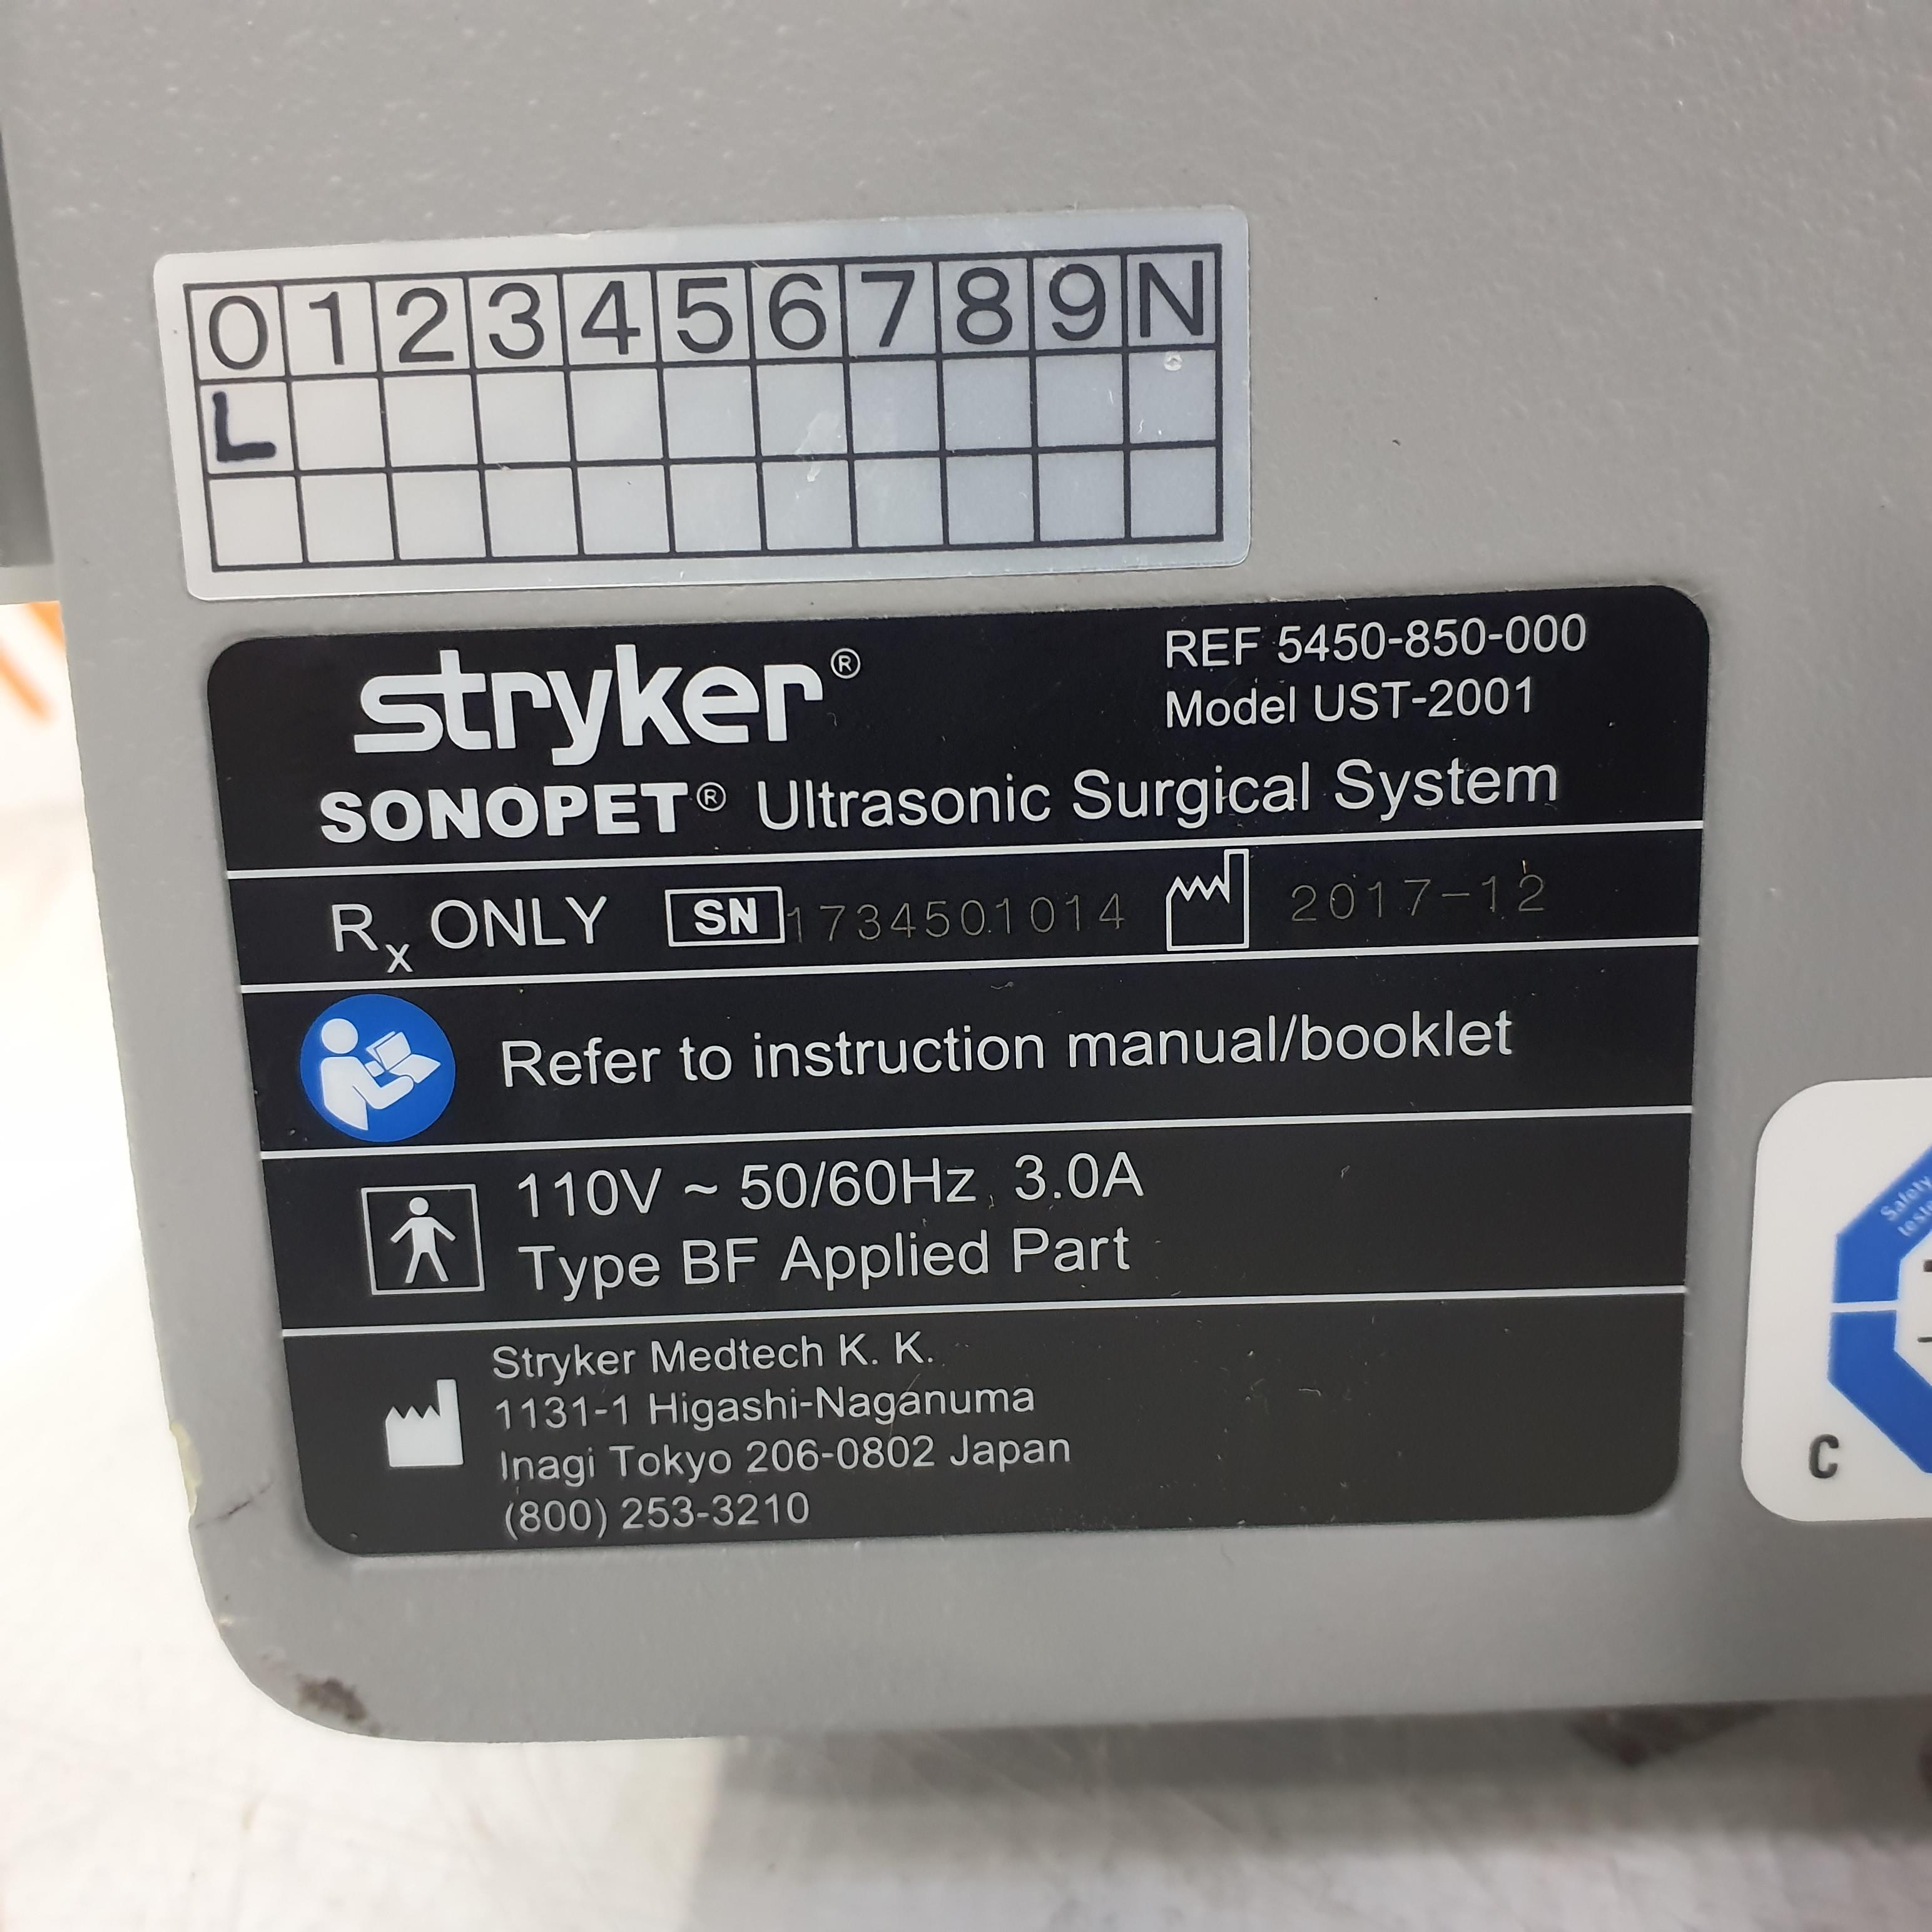 Stryker SonoPet Omni UST-2001 Ultrasonic Surgical System - 366123